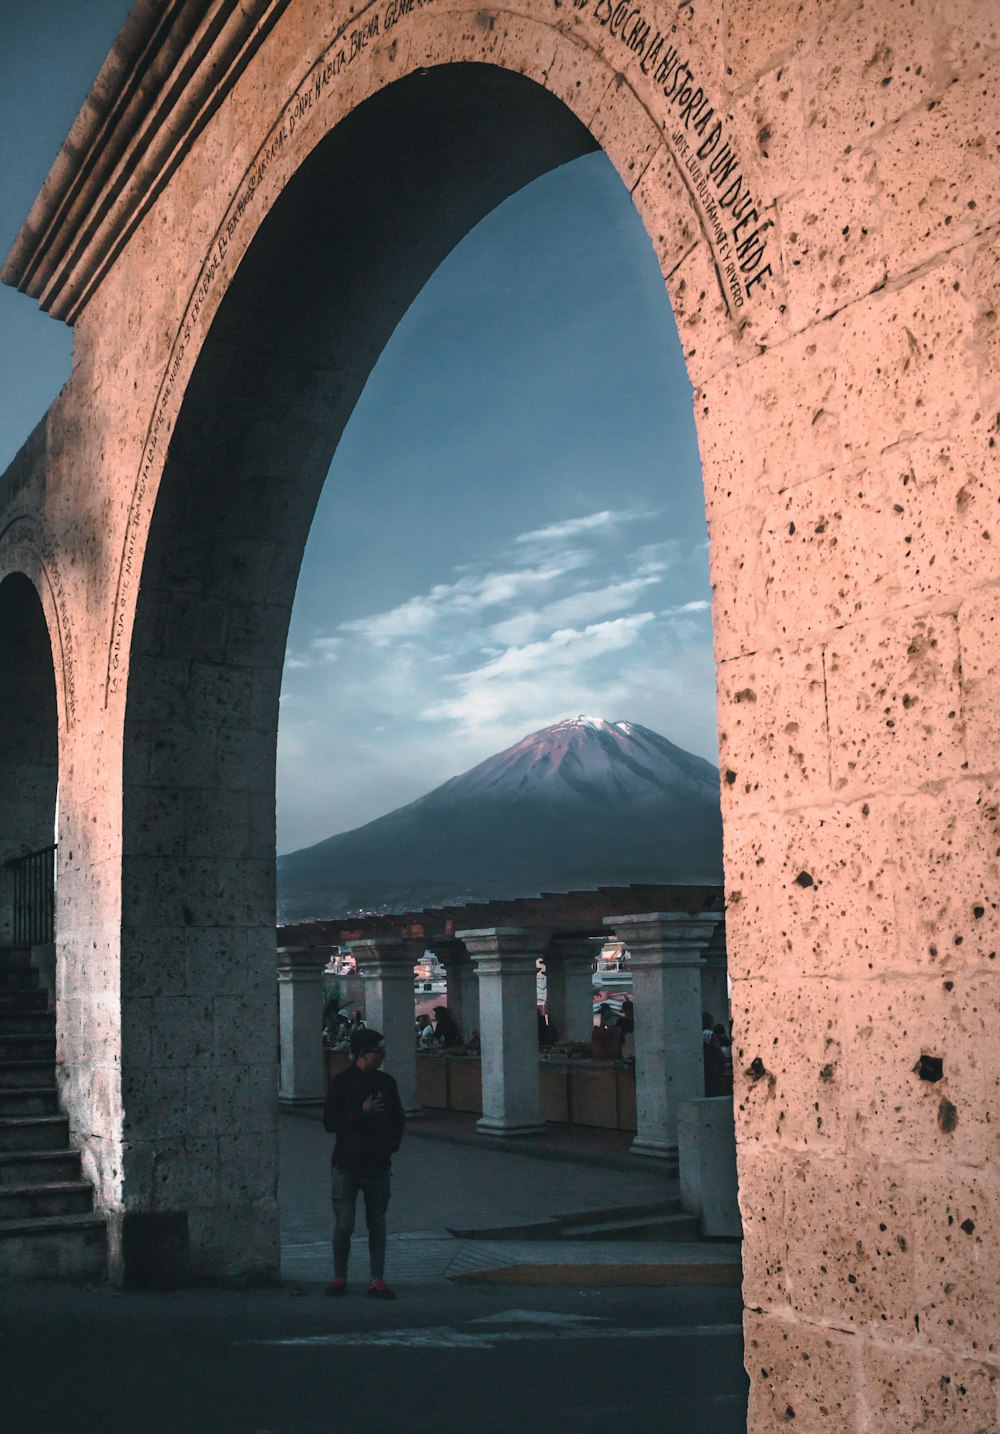 a person standing under an arch with a mountain in the background